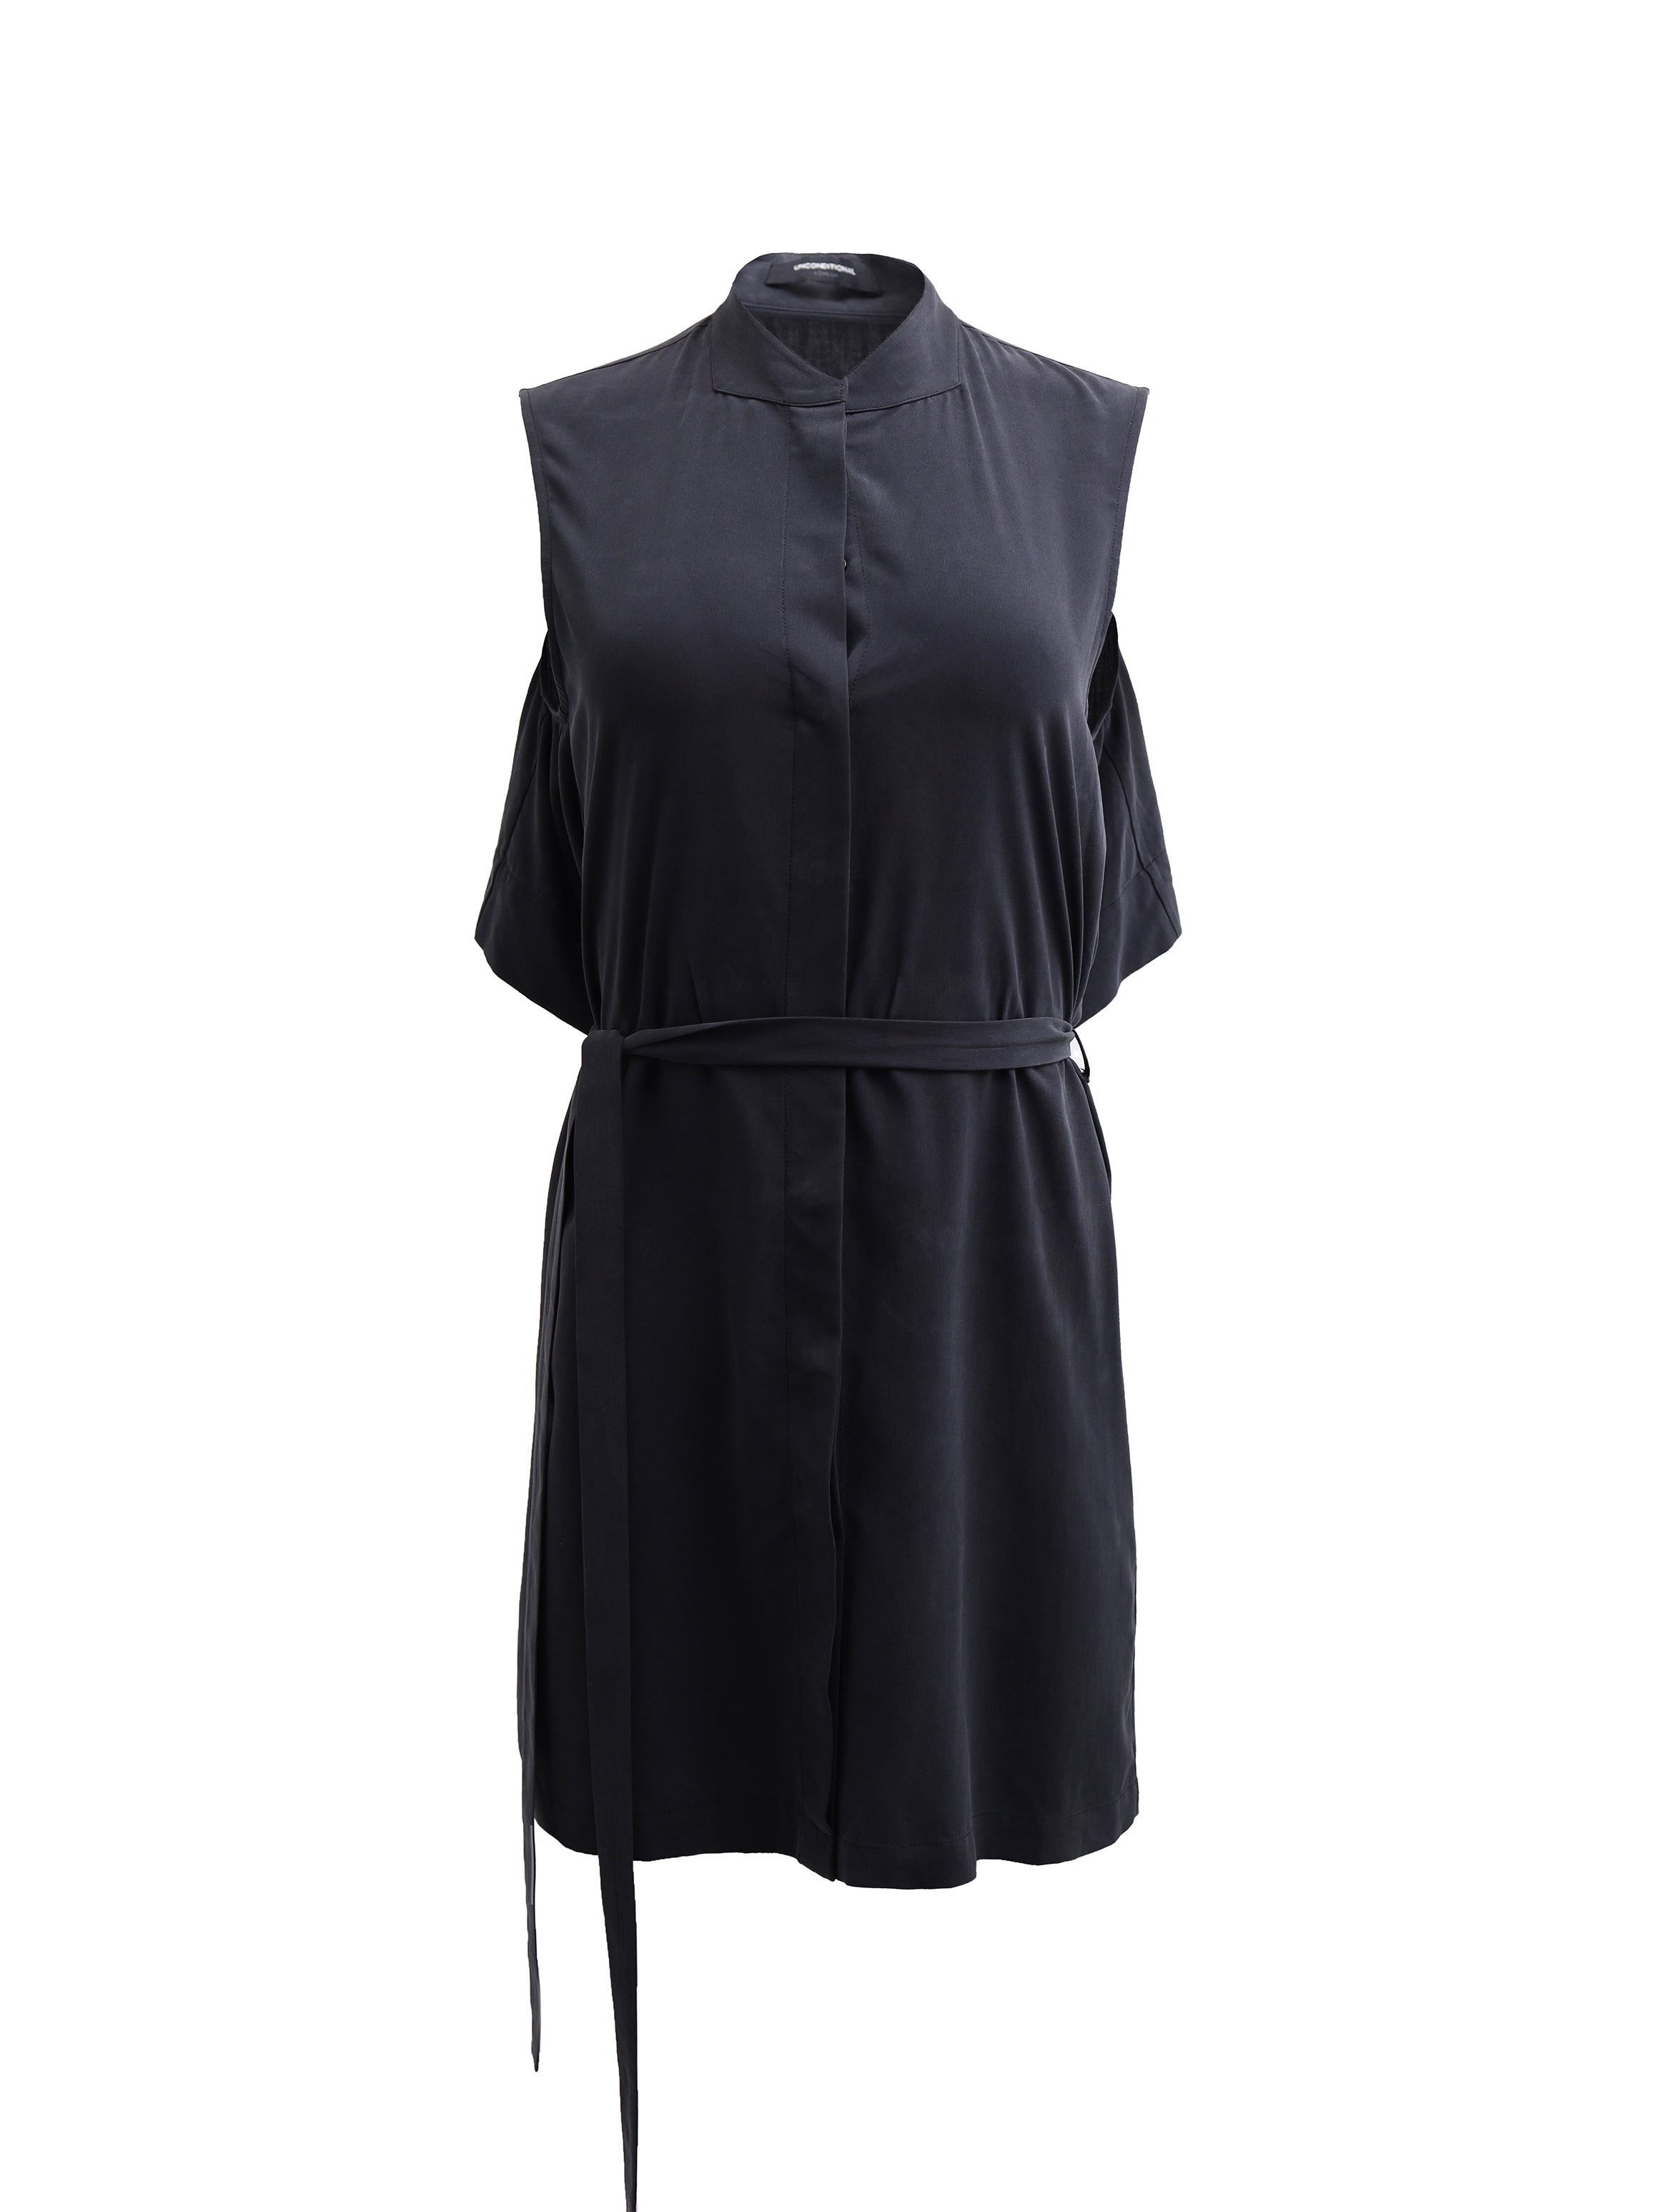 CHARCOAL BUTTON UP DRESS WITH TYE DRESS